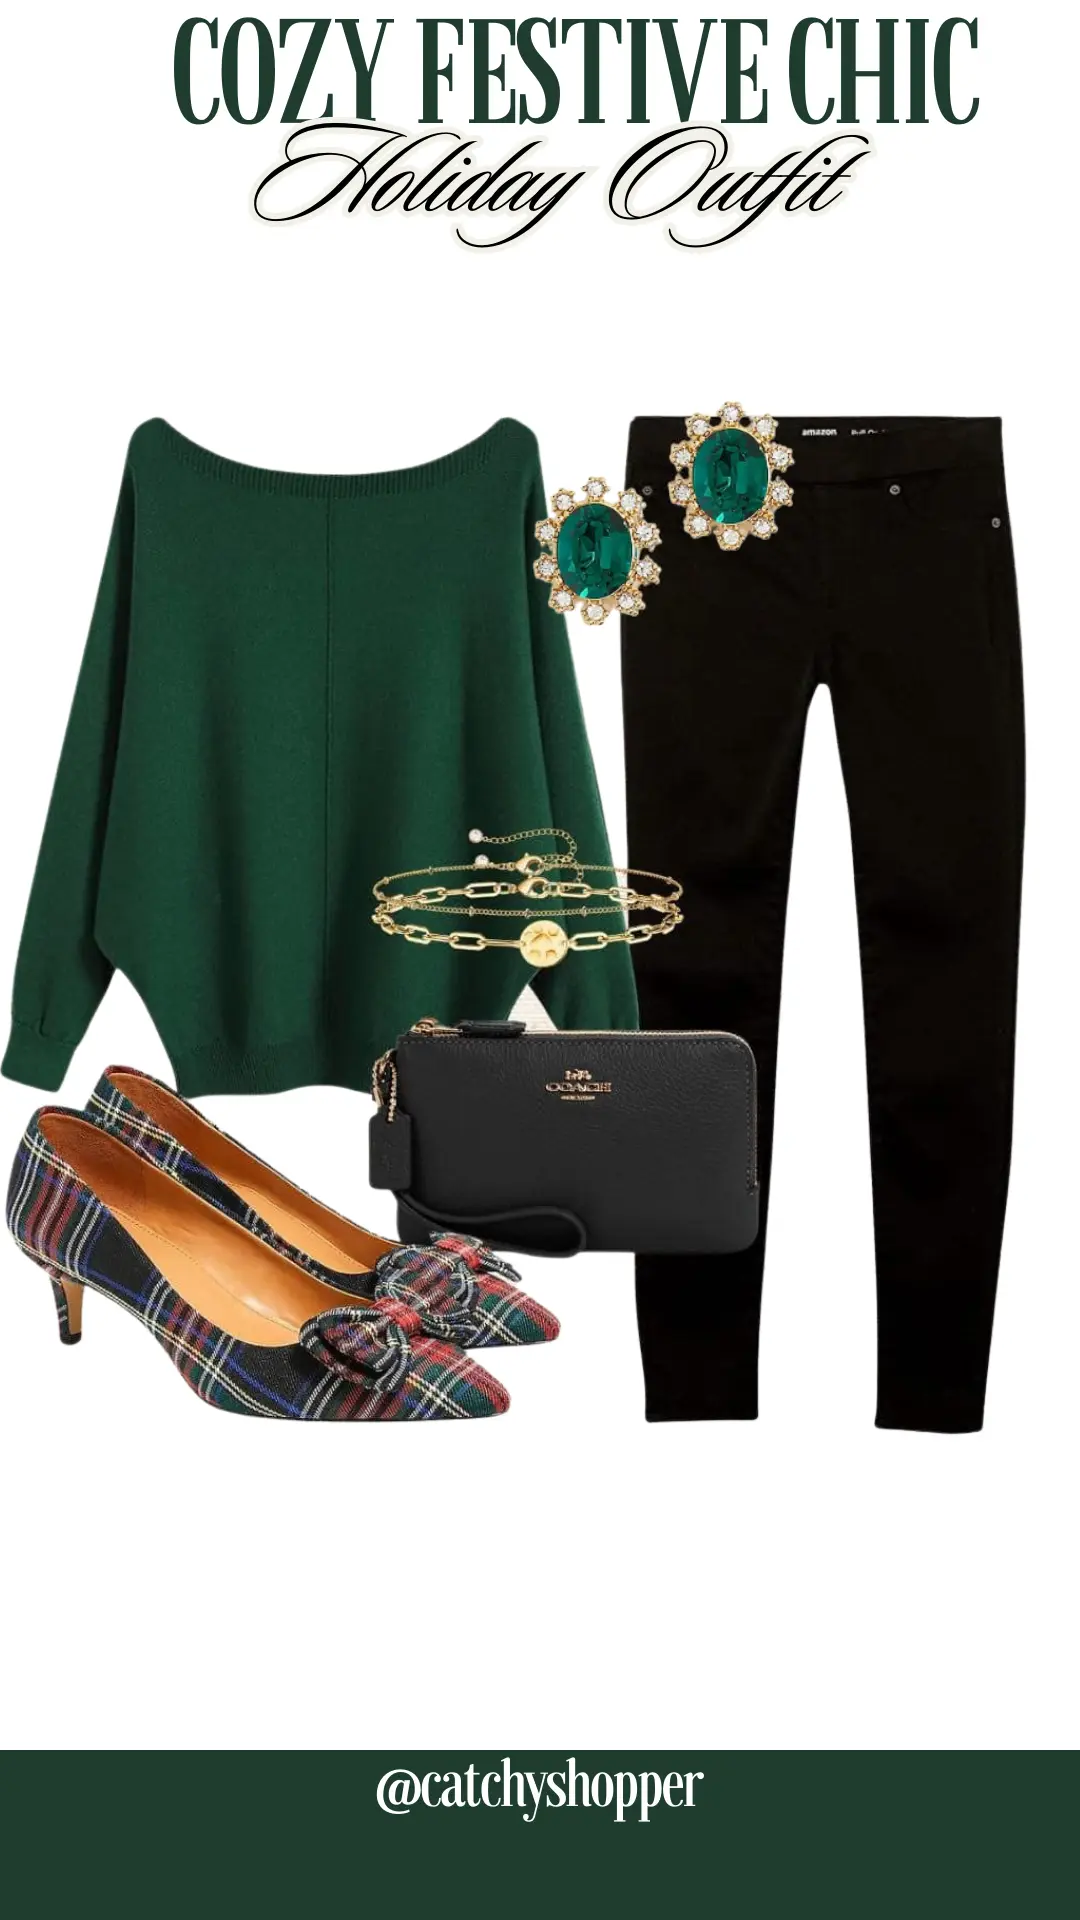 Cozy Festive Chic Holiday Outfit 